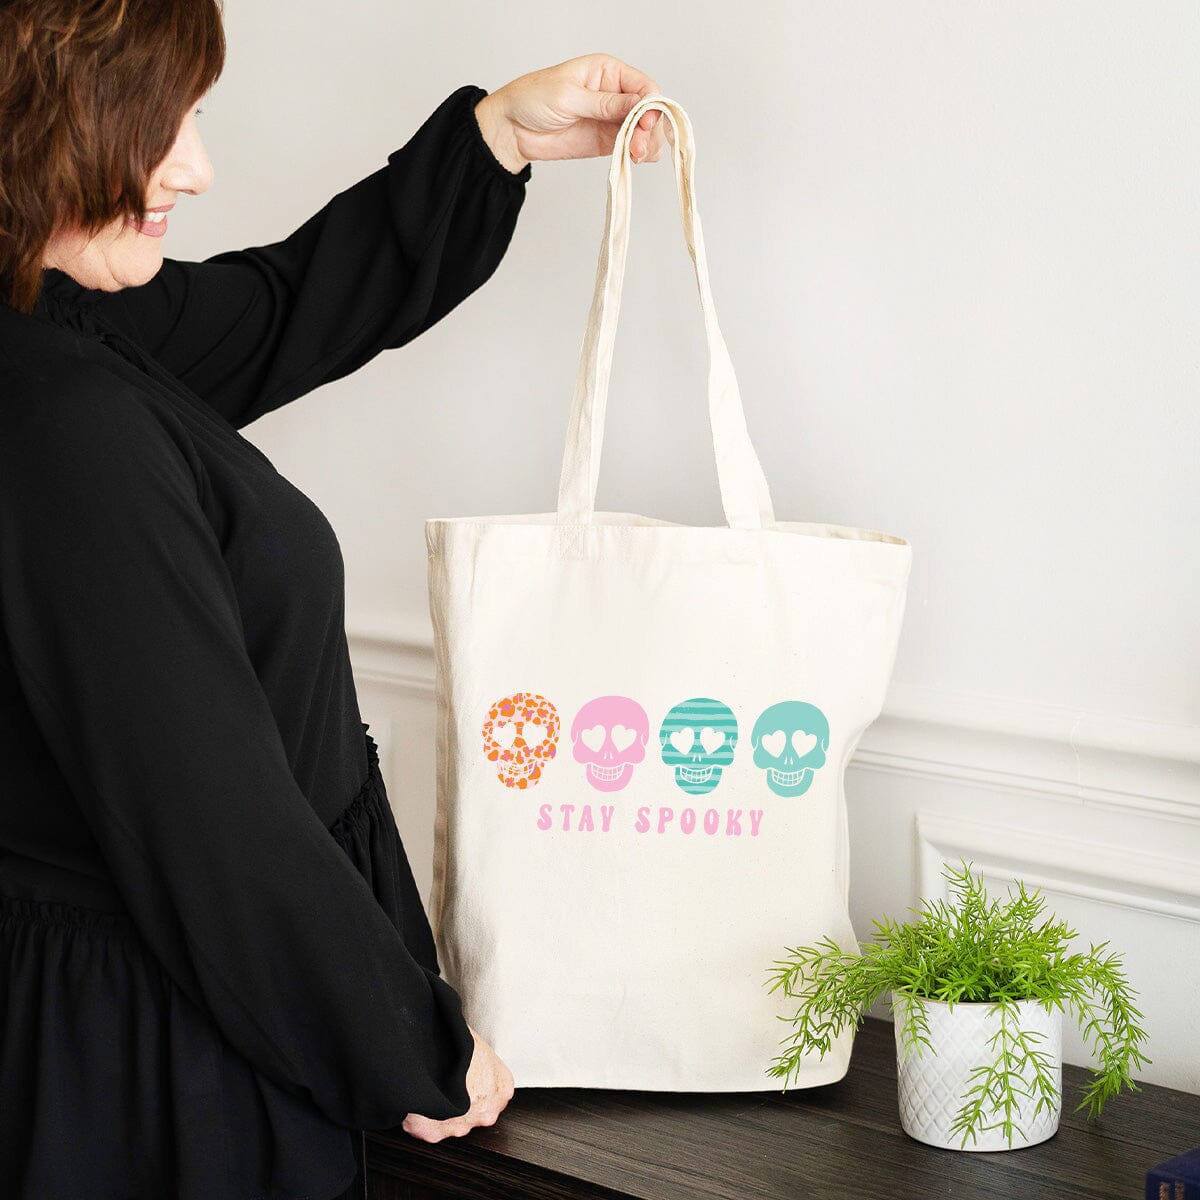 Printed Skull Stay Spooky Canvas Tote